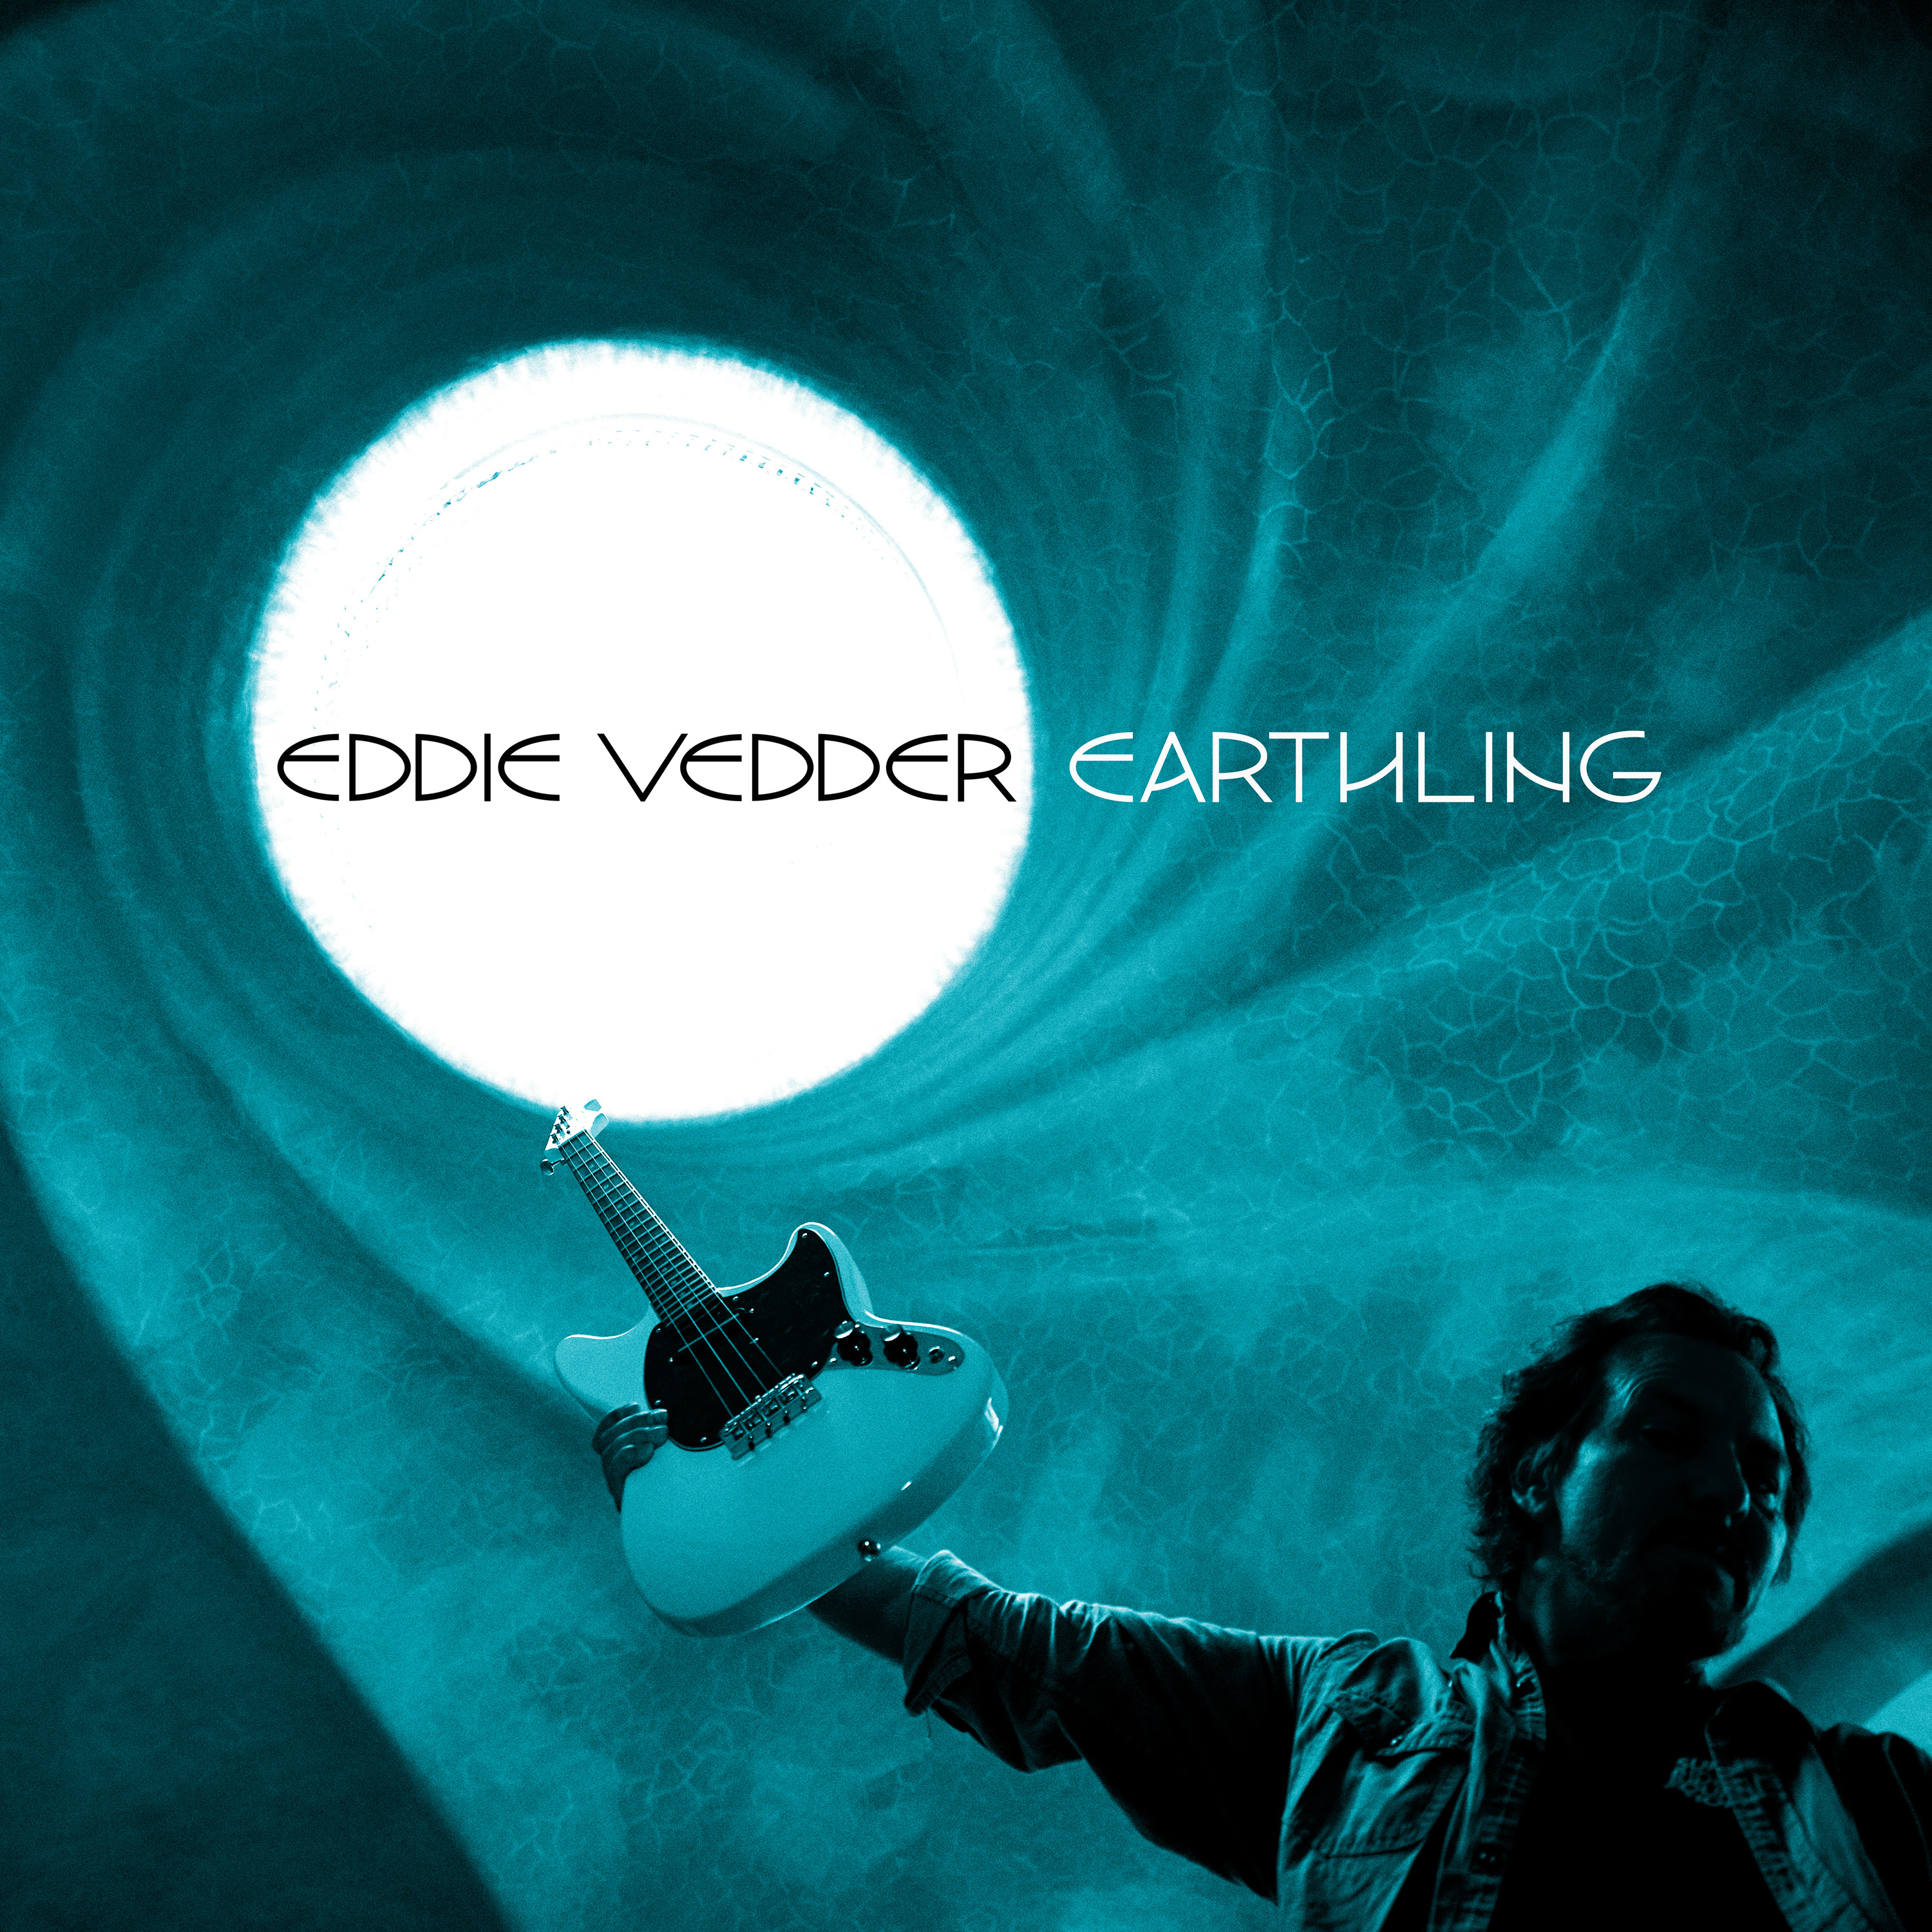 Eddie Vedder's New Album Earthling Is Out Now